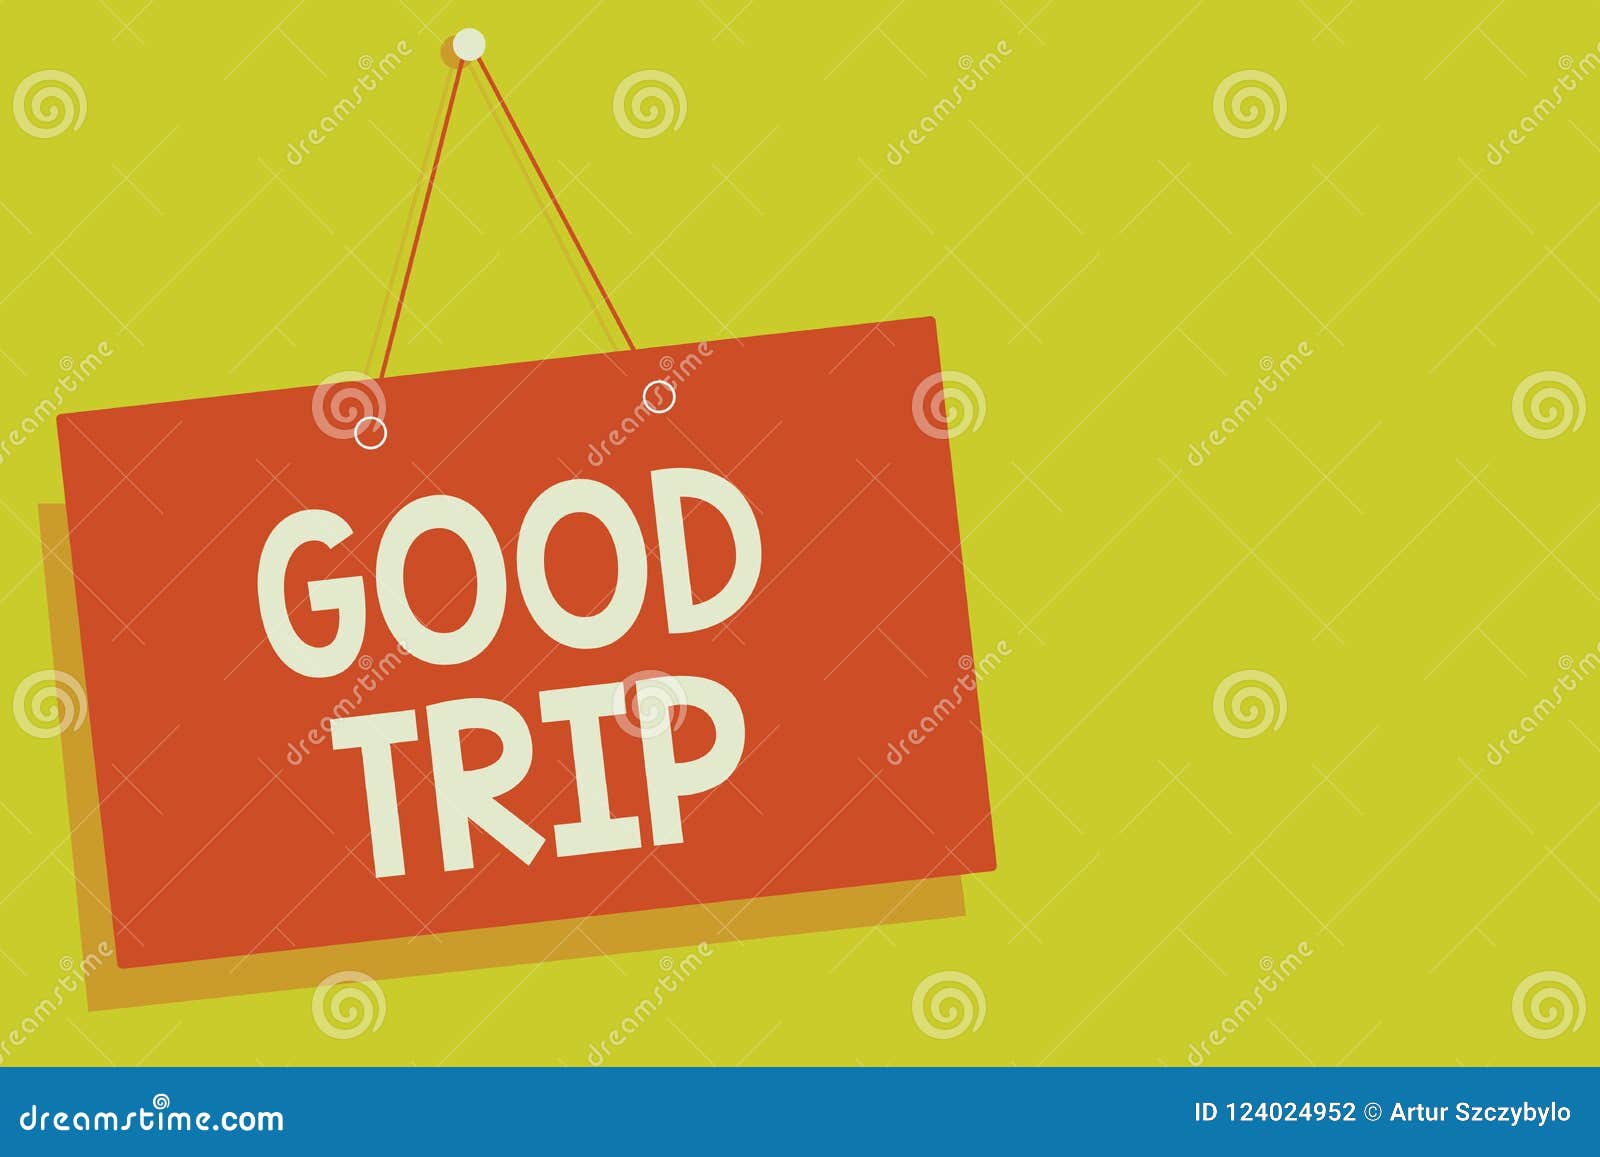 good trip meaning